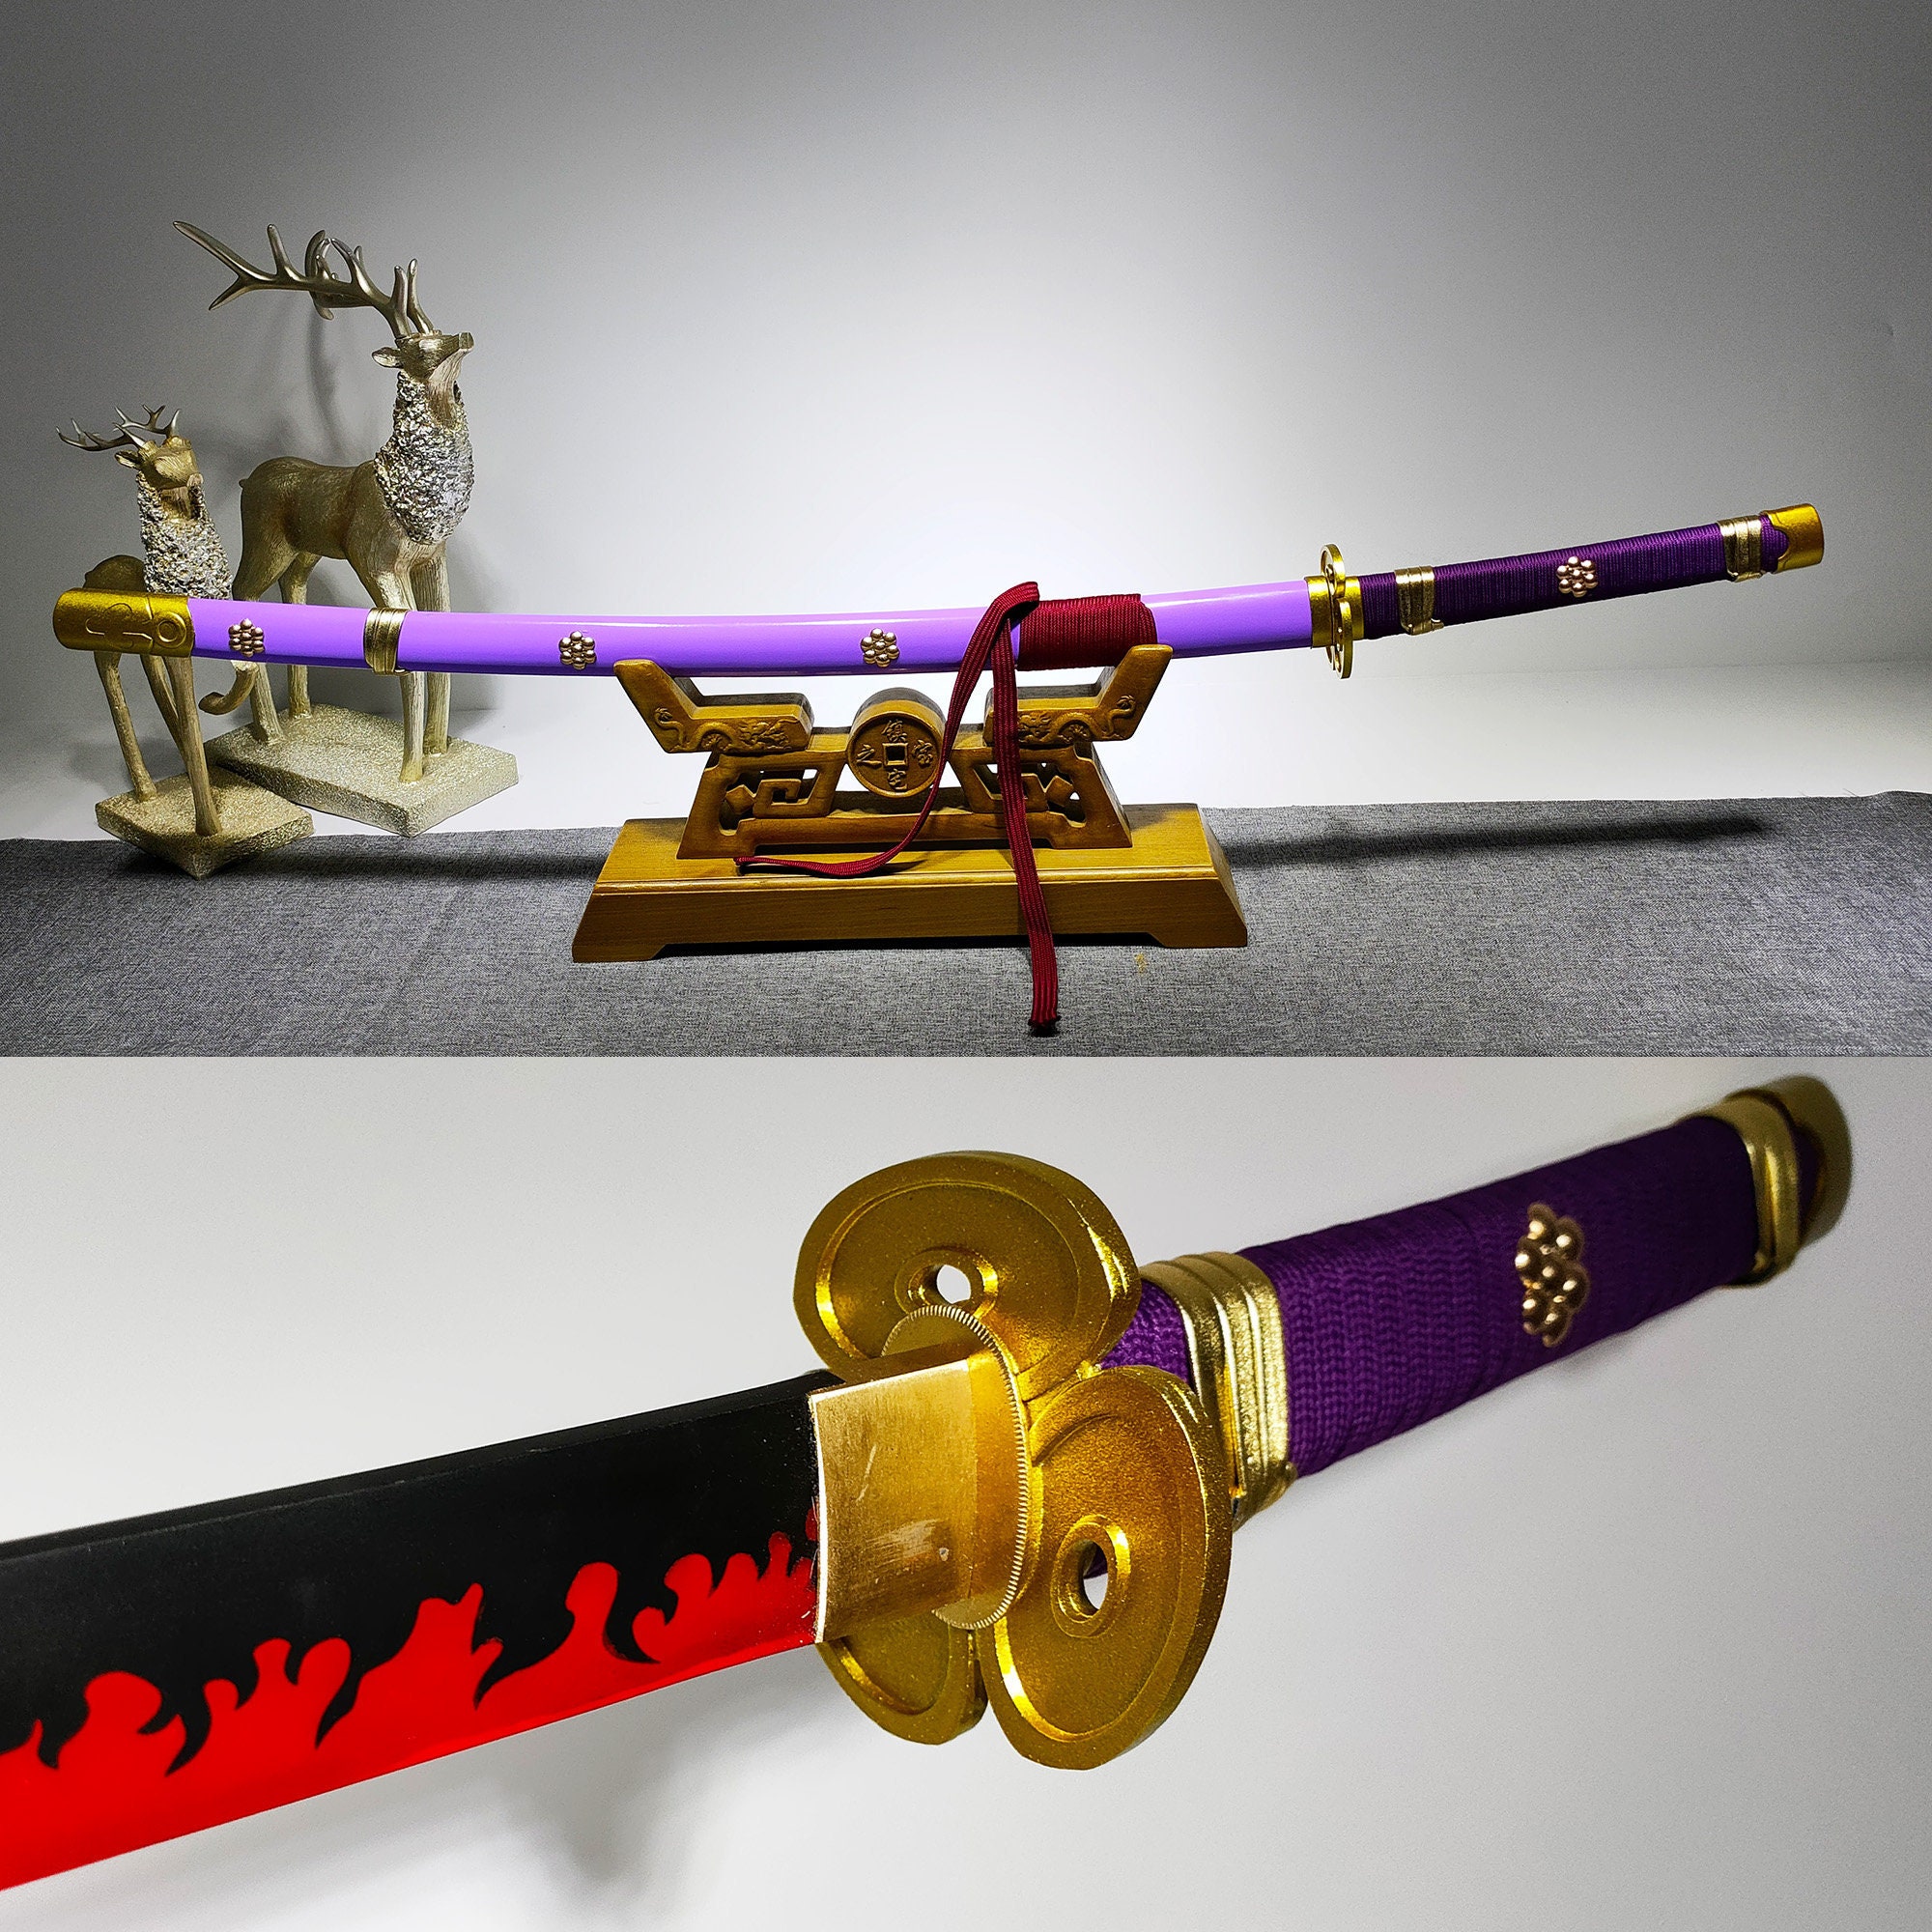 42 Fantasy Anime Sword Video Game Weapon Replica with Neon Color Ropes